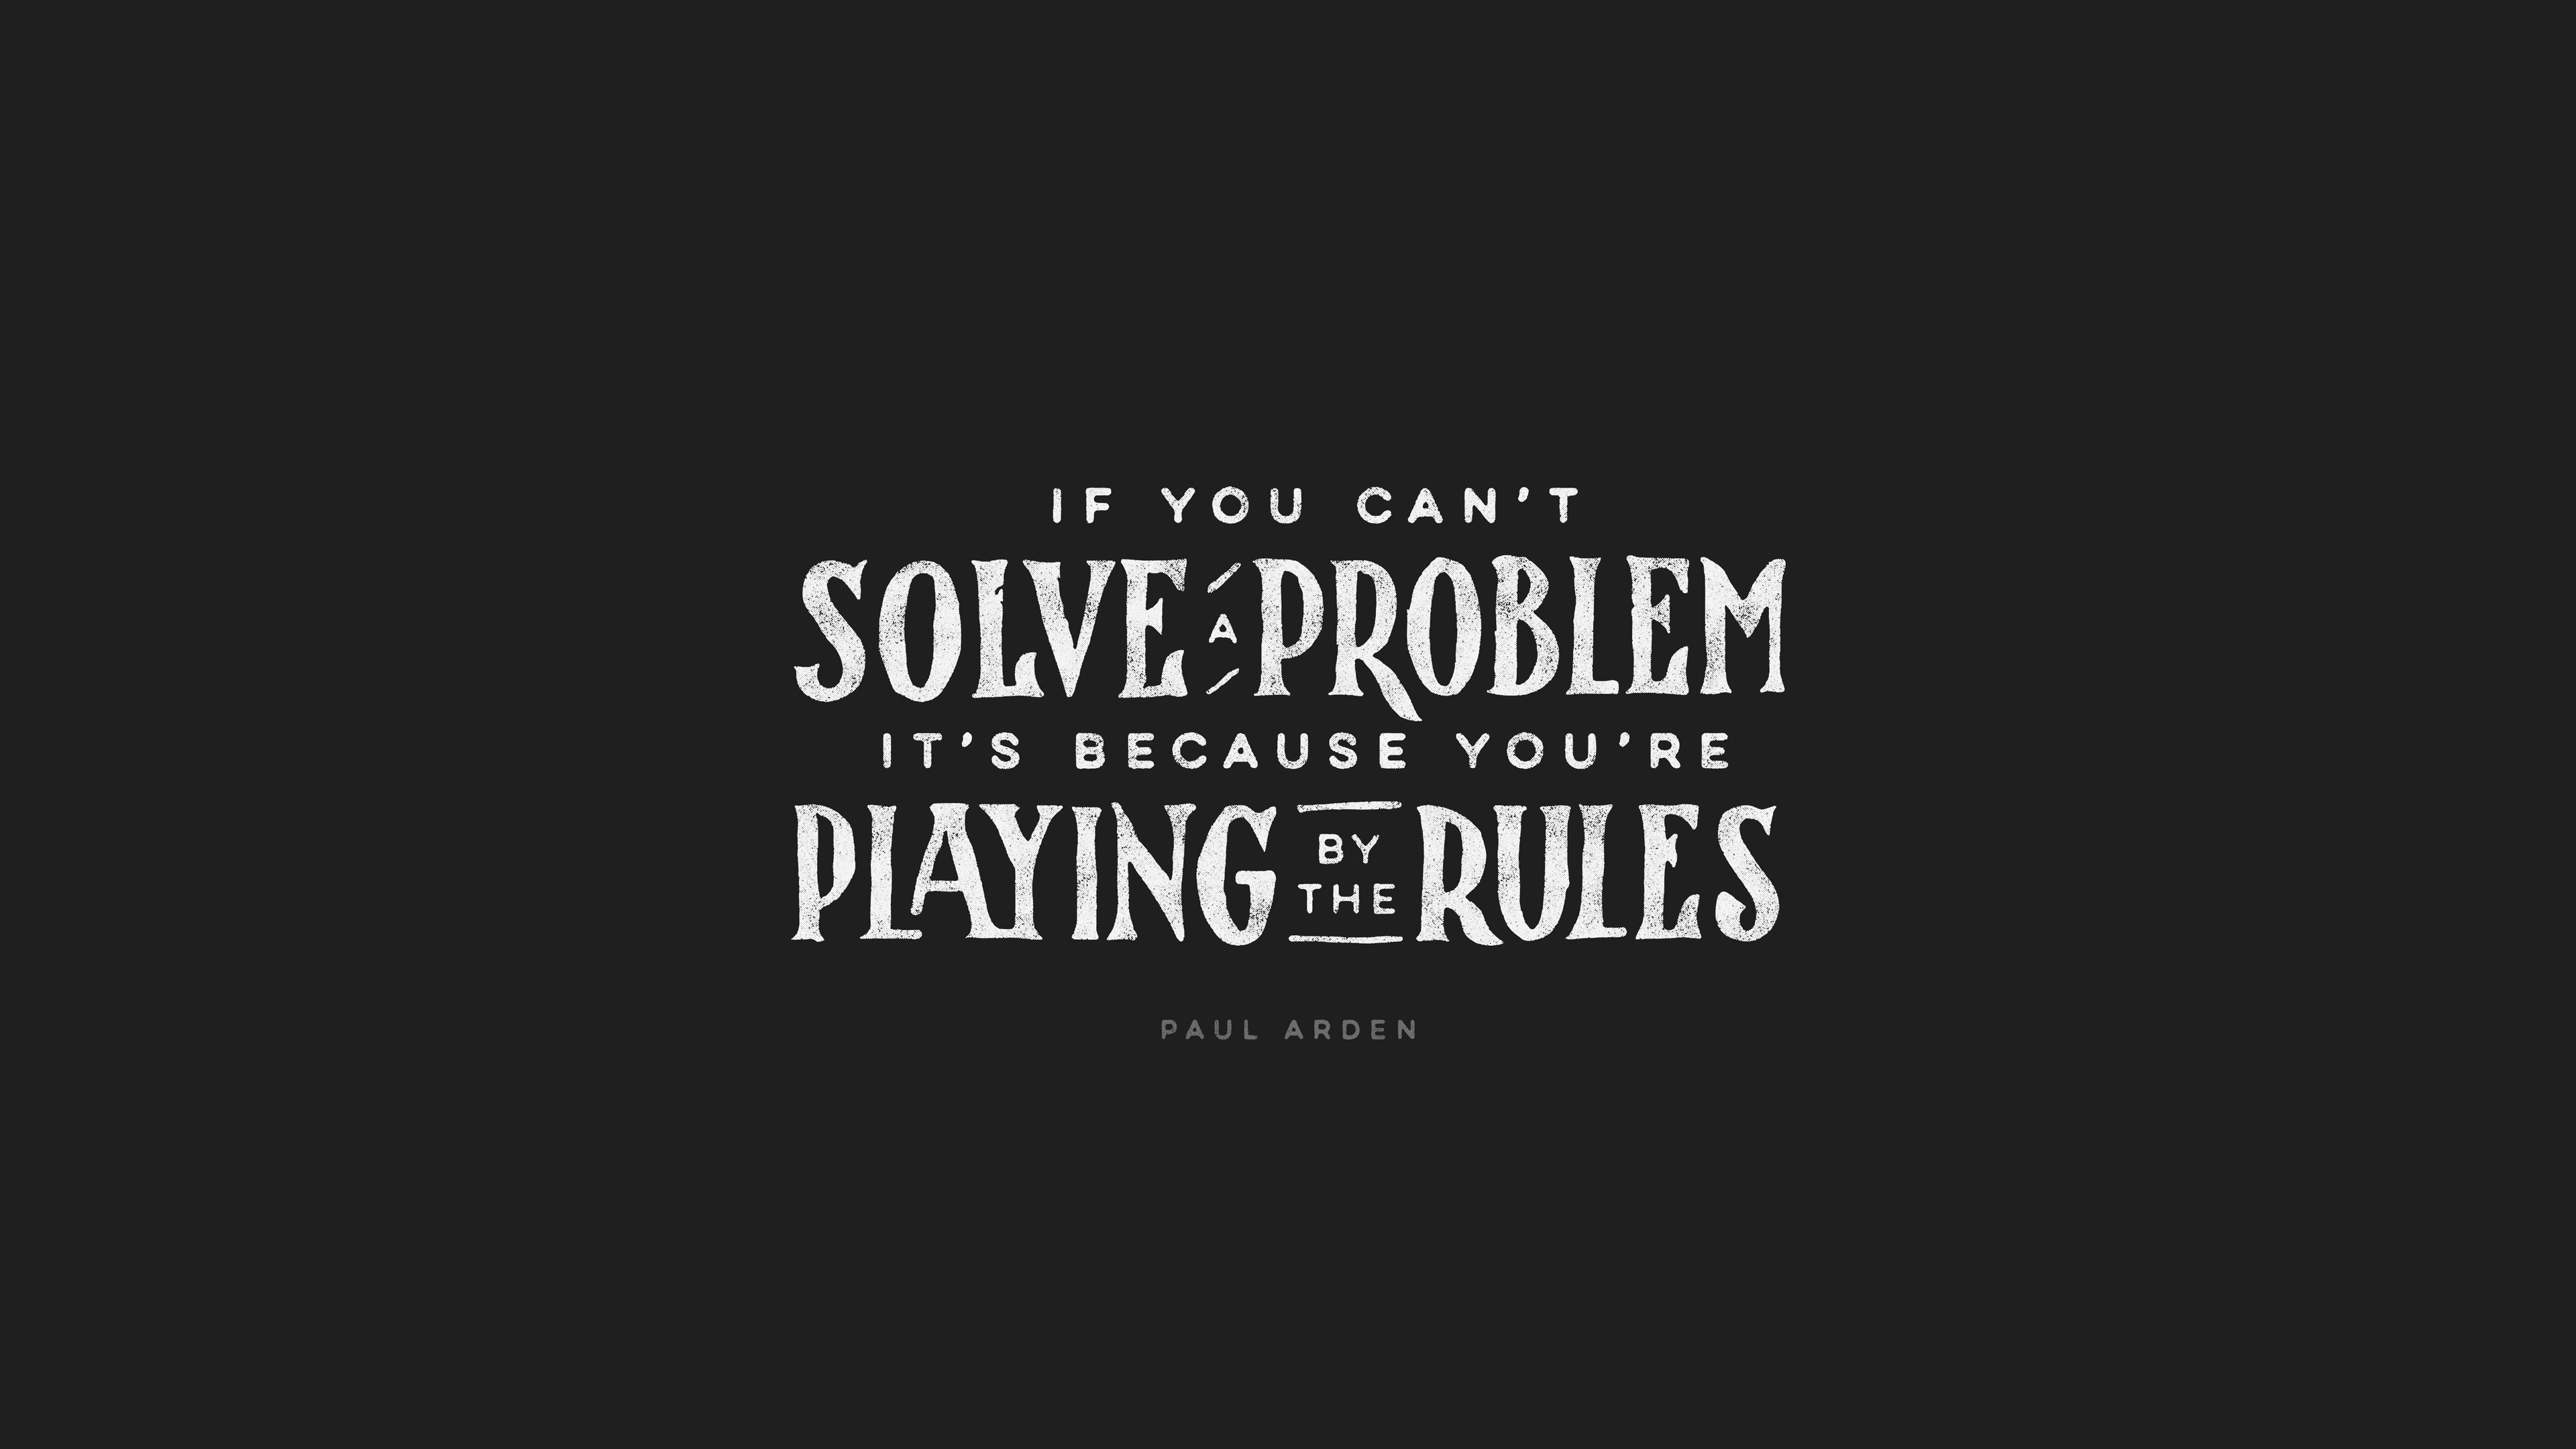 computer wallpaper - If You Can'T Solve Problem It'S Because You'Re Playing Rules Daul Arden